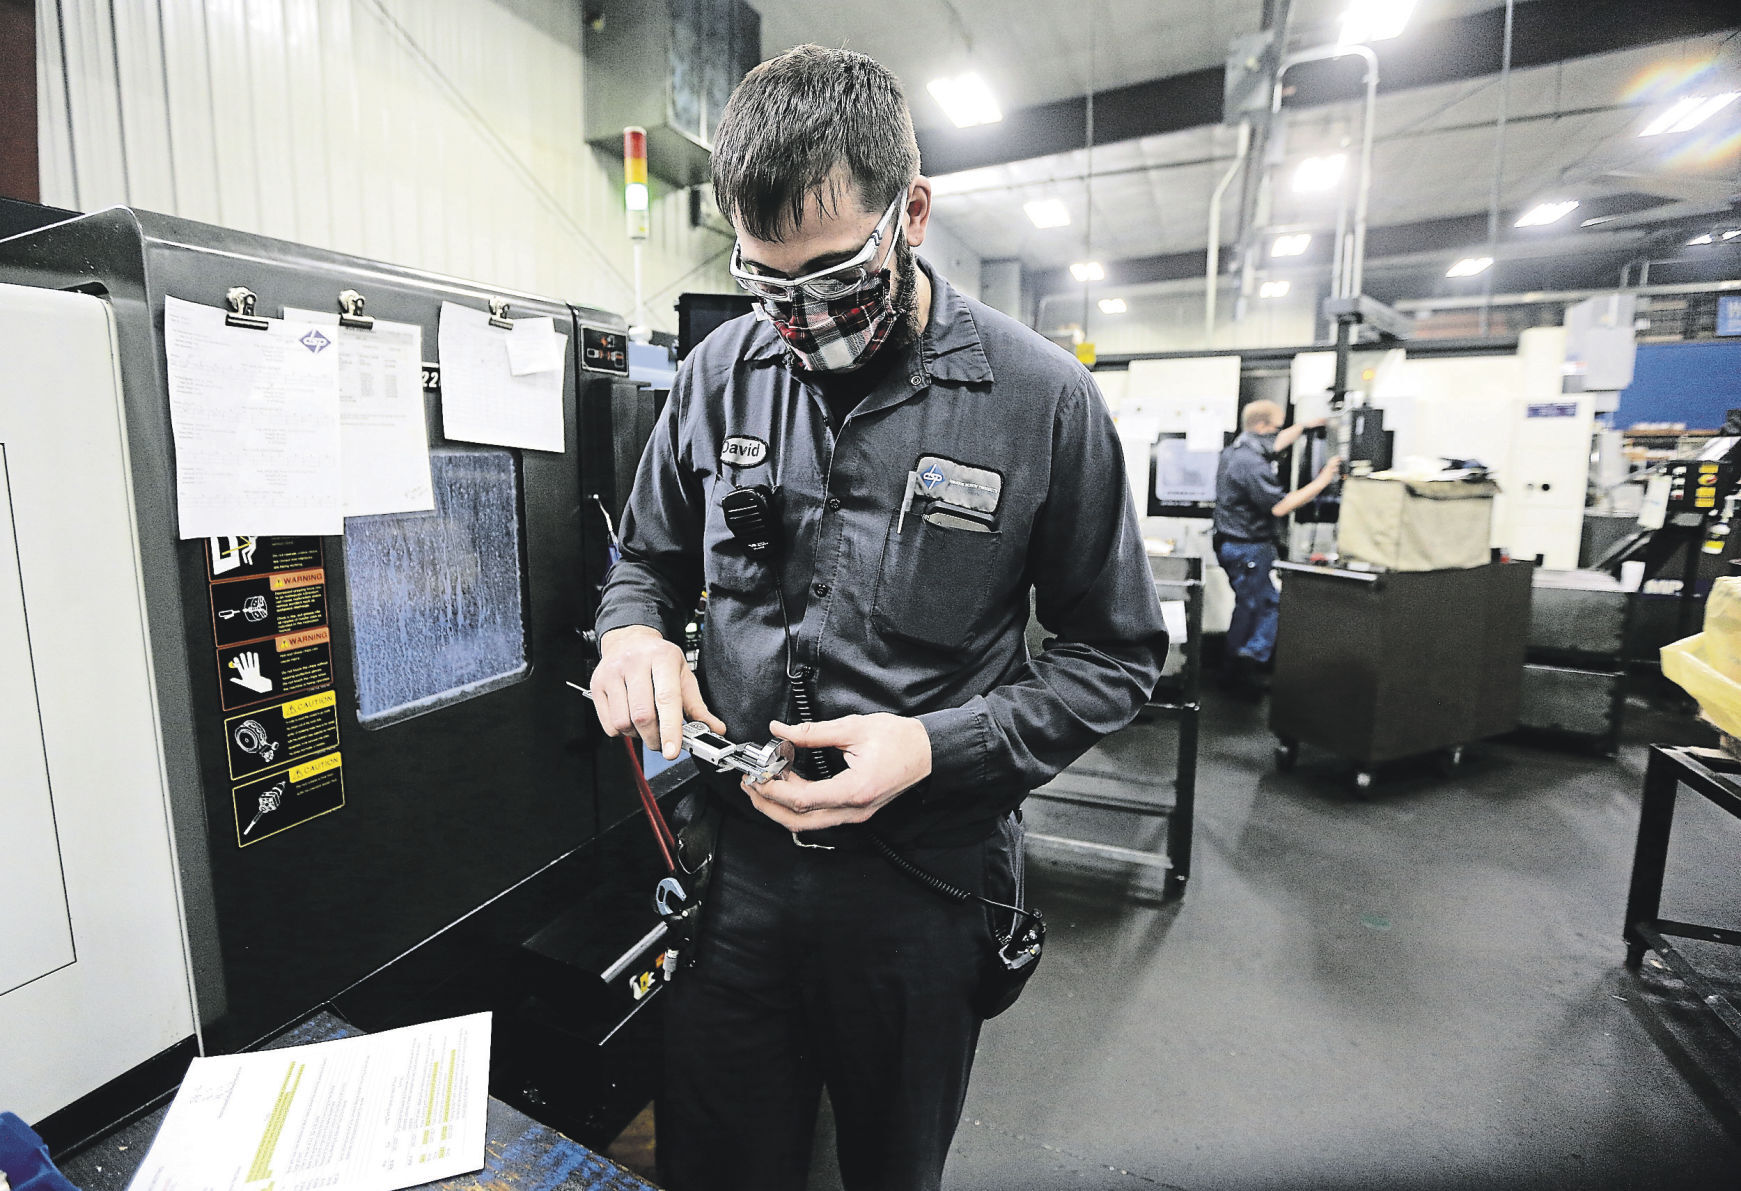 David Bentz, applications engineer technician at Dubuque Screw Products, Inc., checks over a part produced in the Dubuque plant recently.    PHOTO CREDIT: Dave Kettering